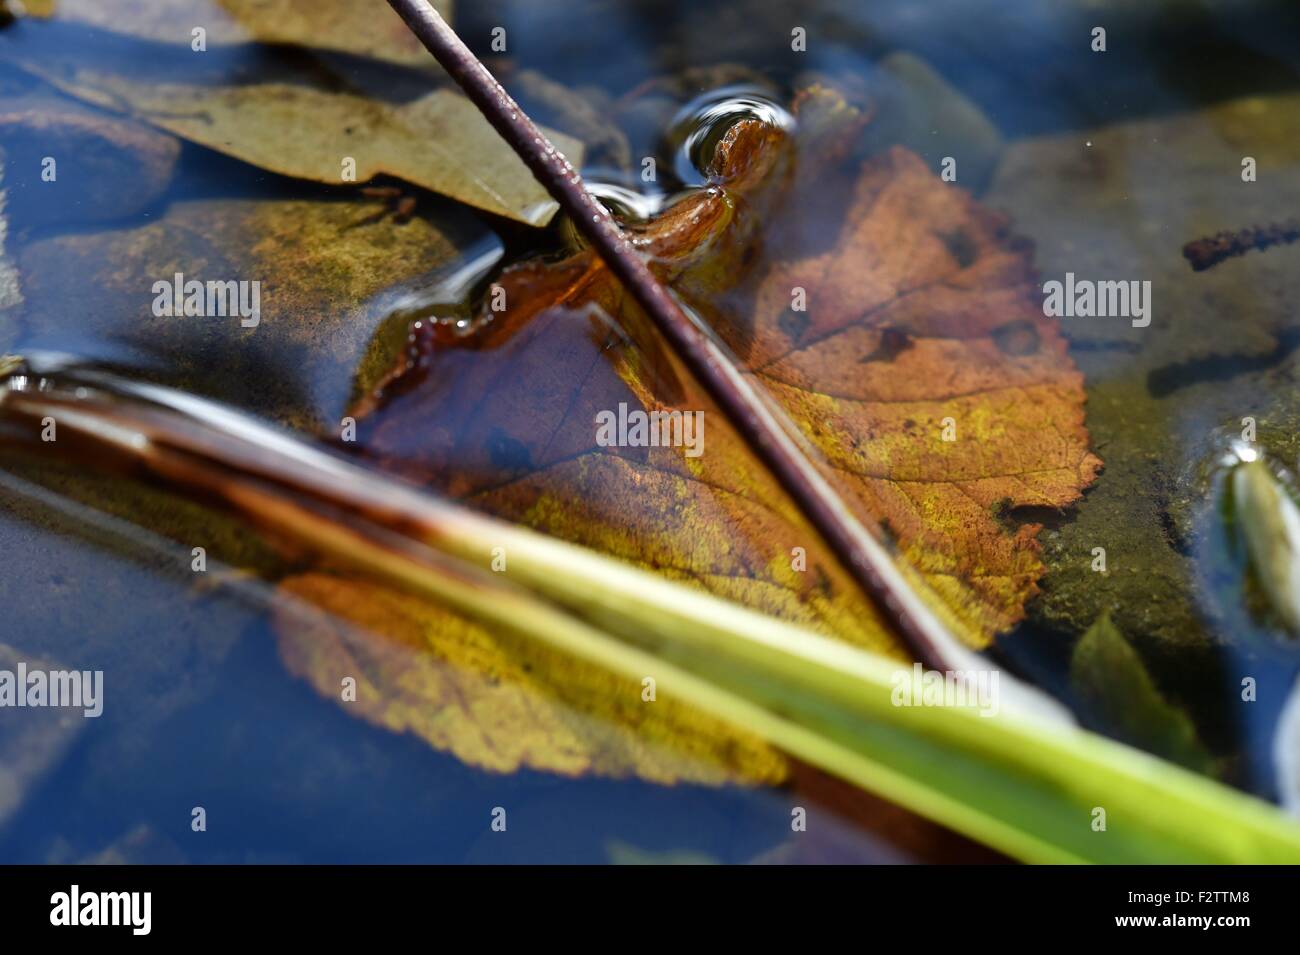 A leaf in autumn, Germany, near city of Riefensbeek, 23. September 2015. Photo: Frank May Stock Photo